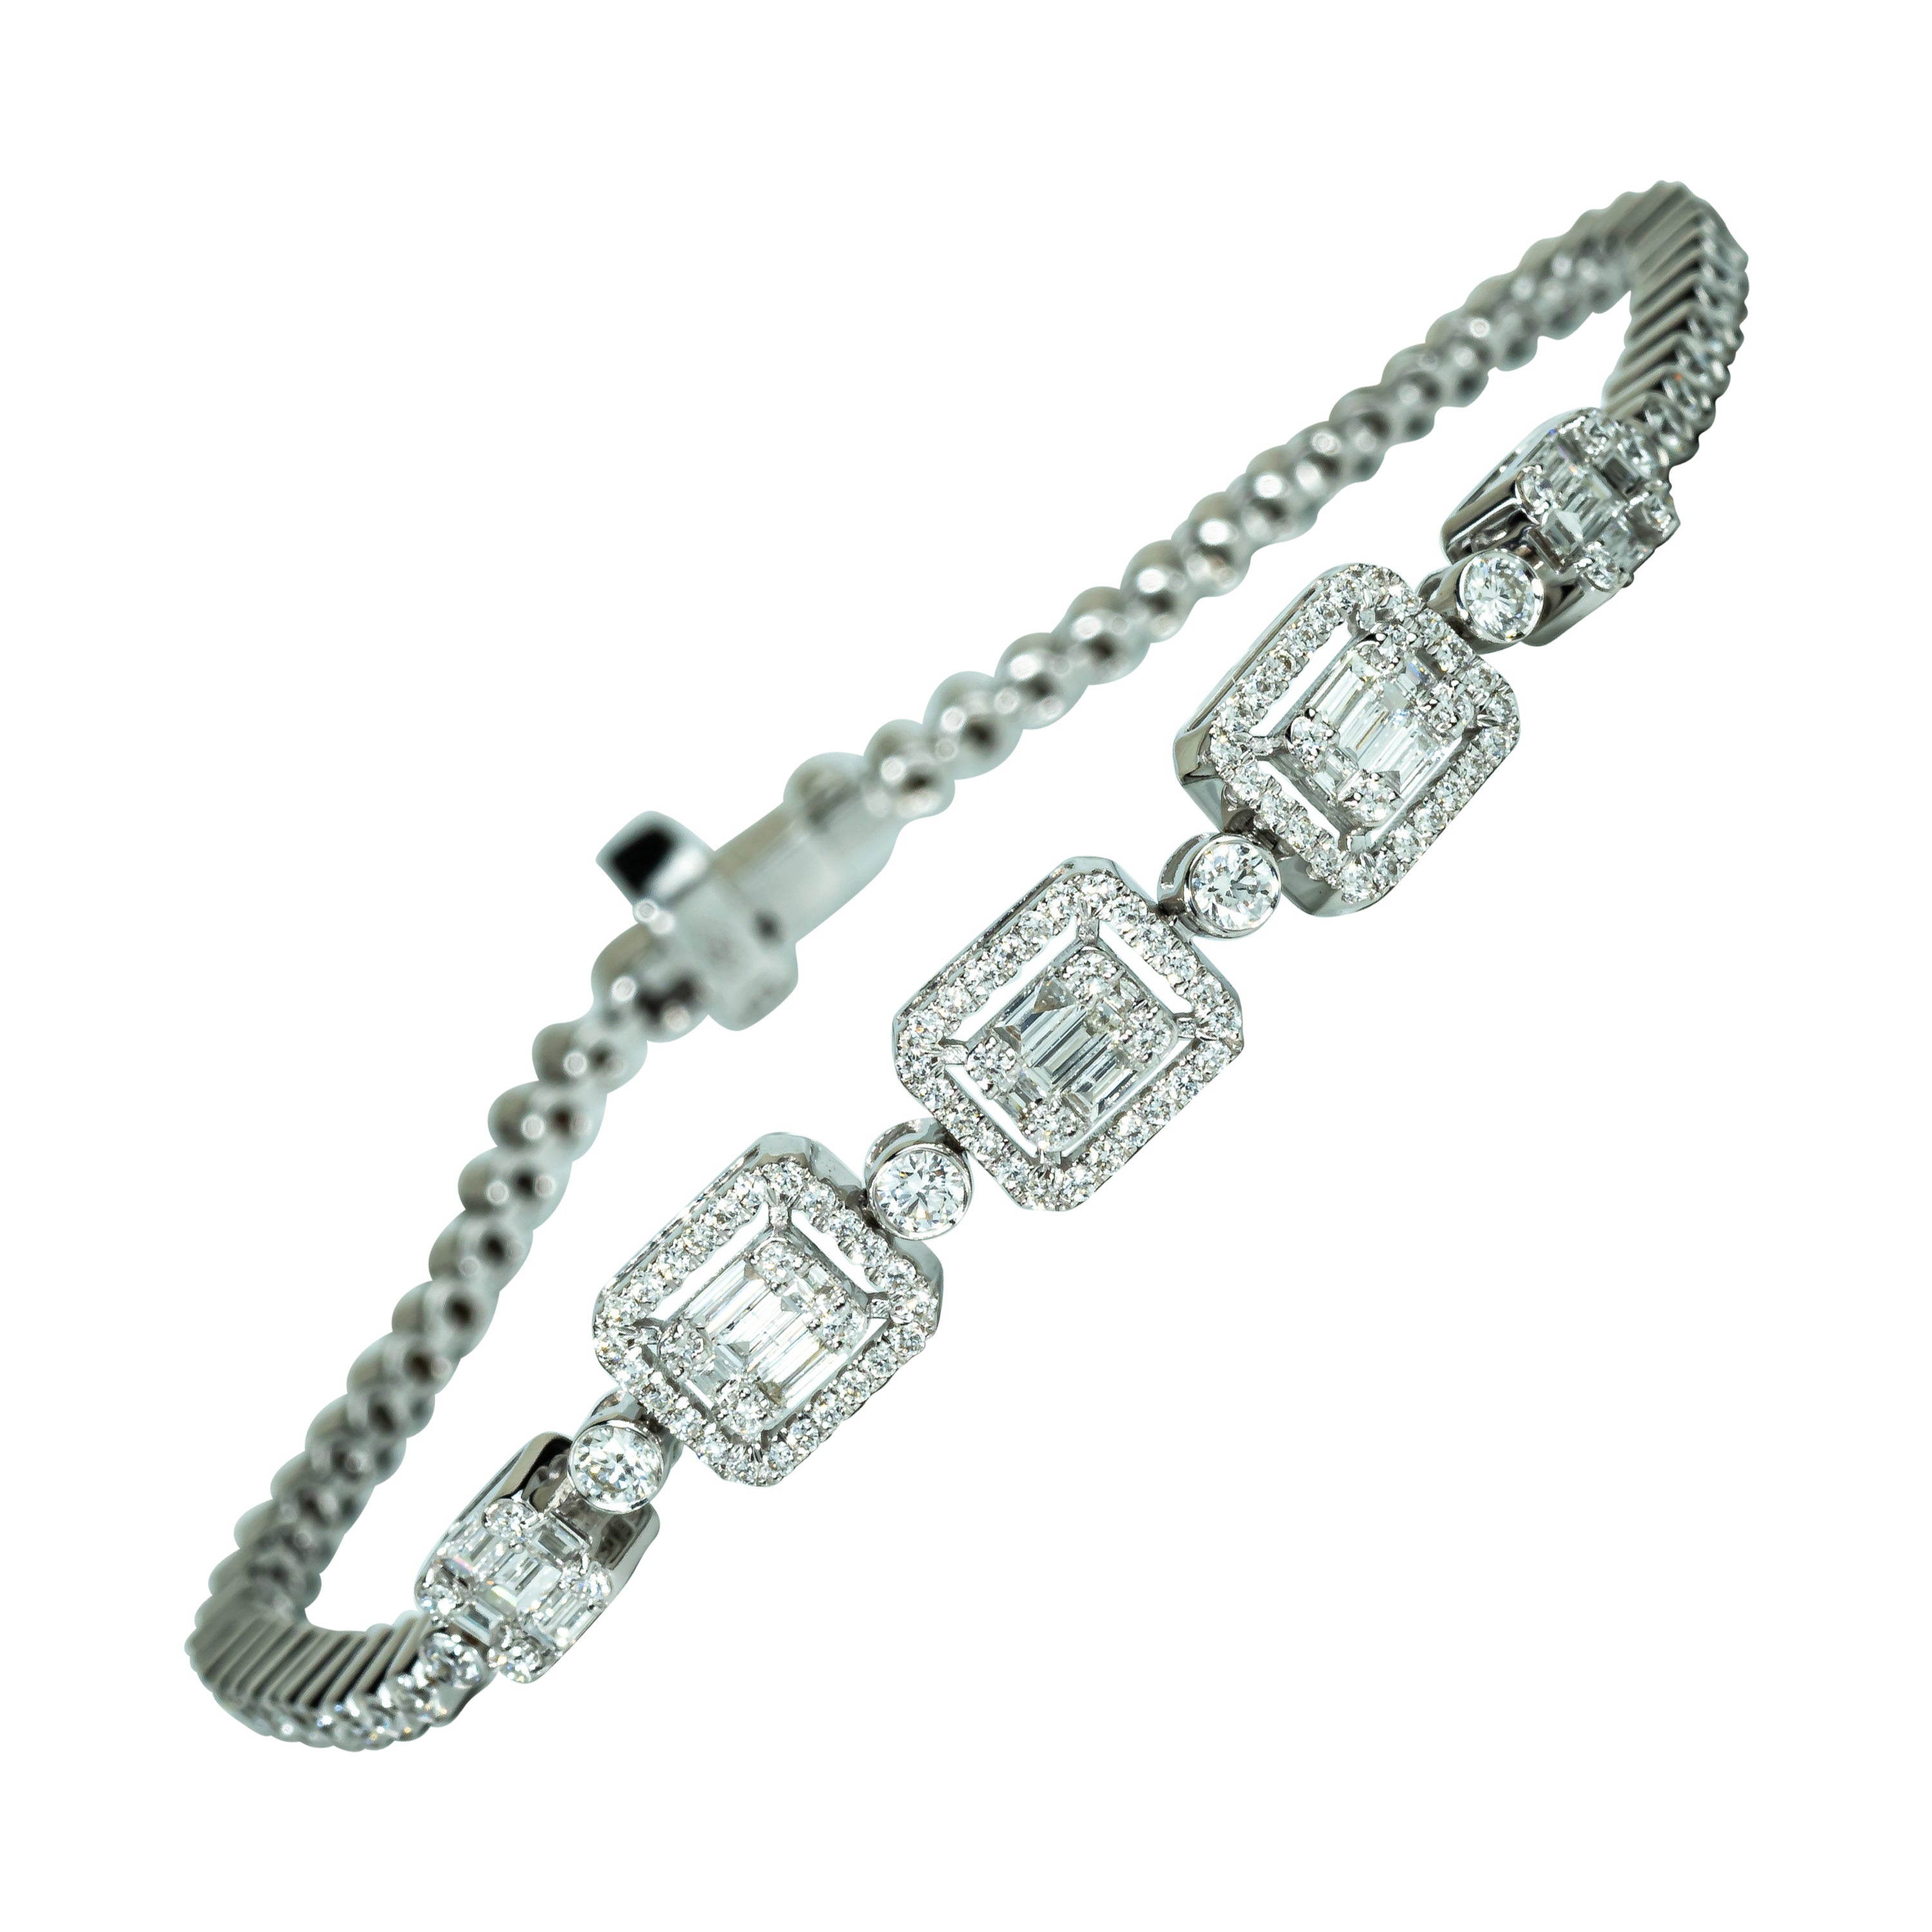 2.5 TCW Round Baguette Cut Natural Diamond Tennis Bracelet For Her For Sale